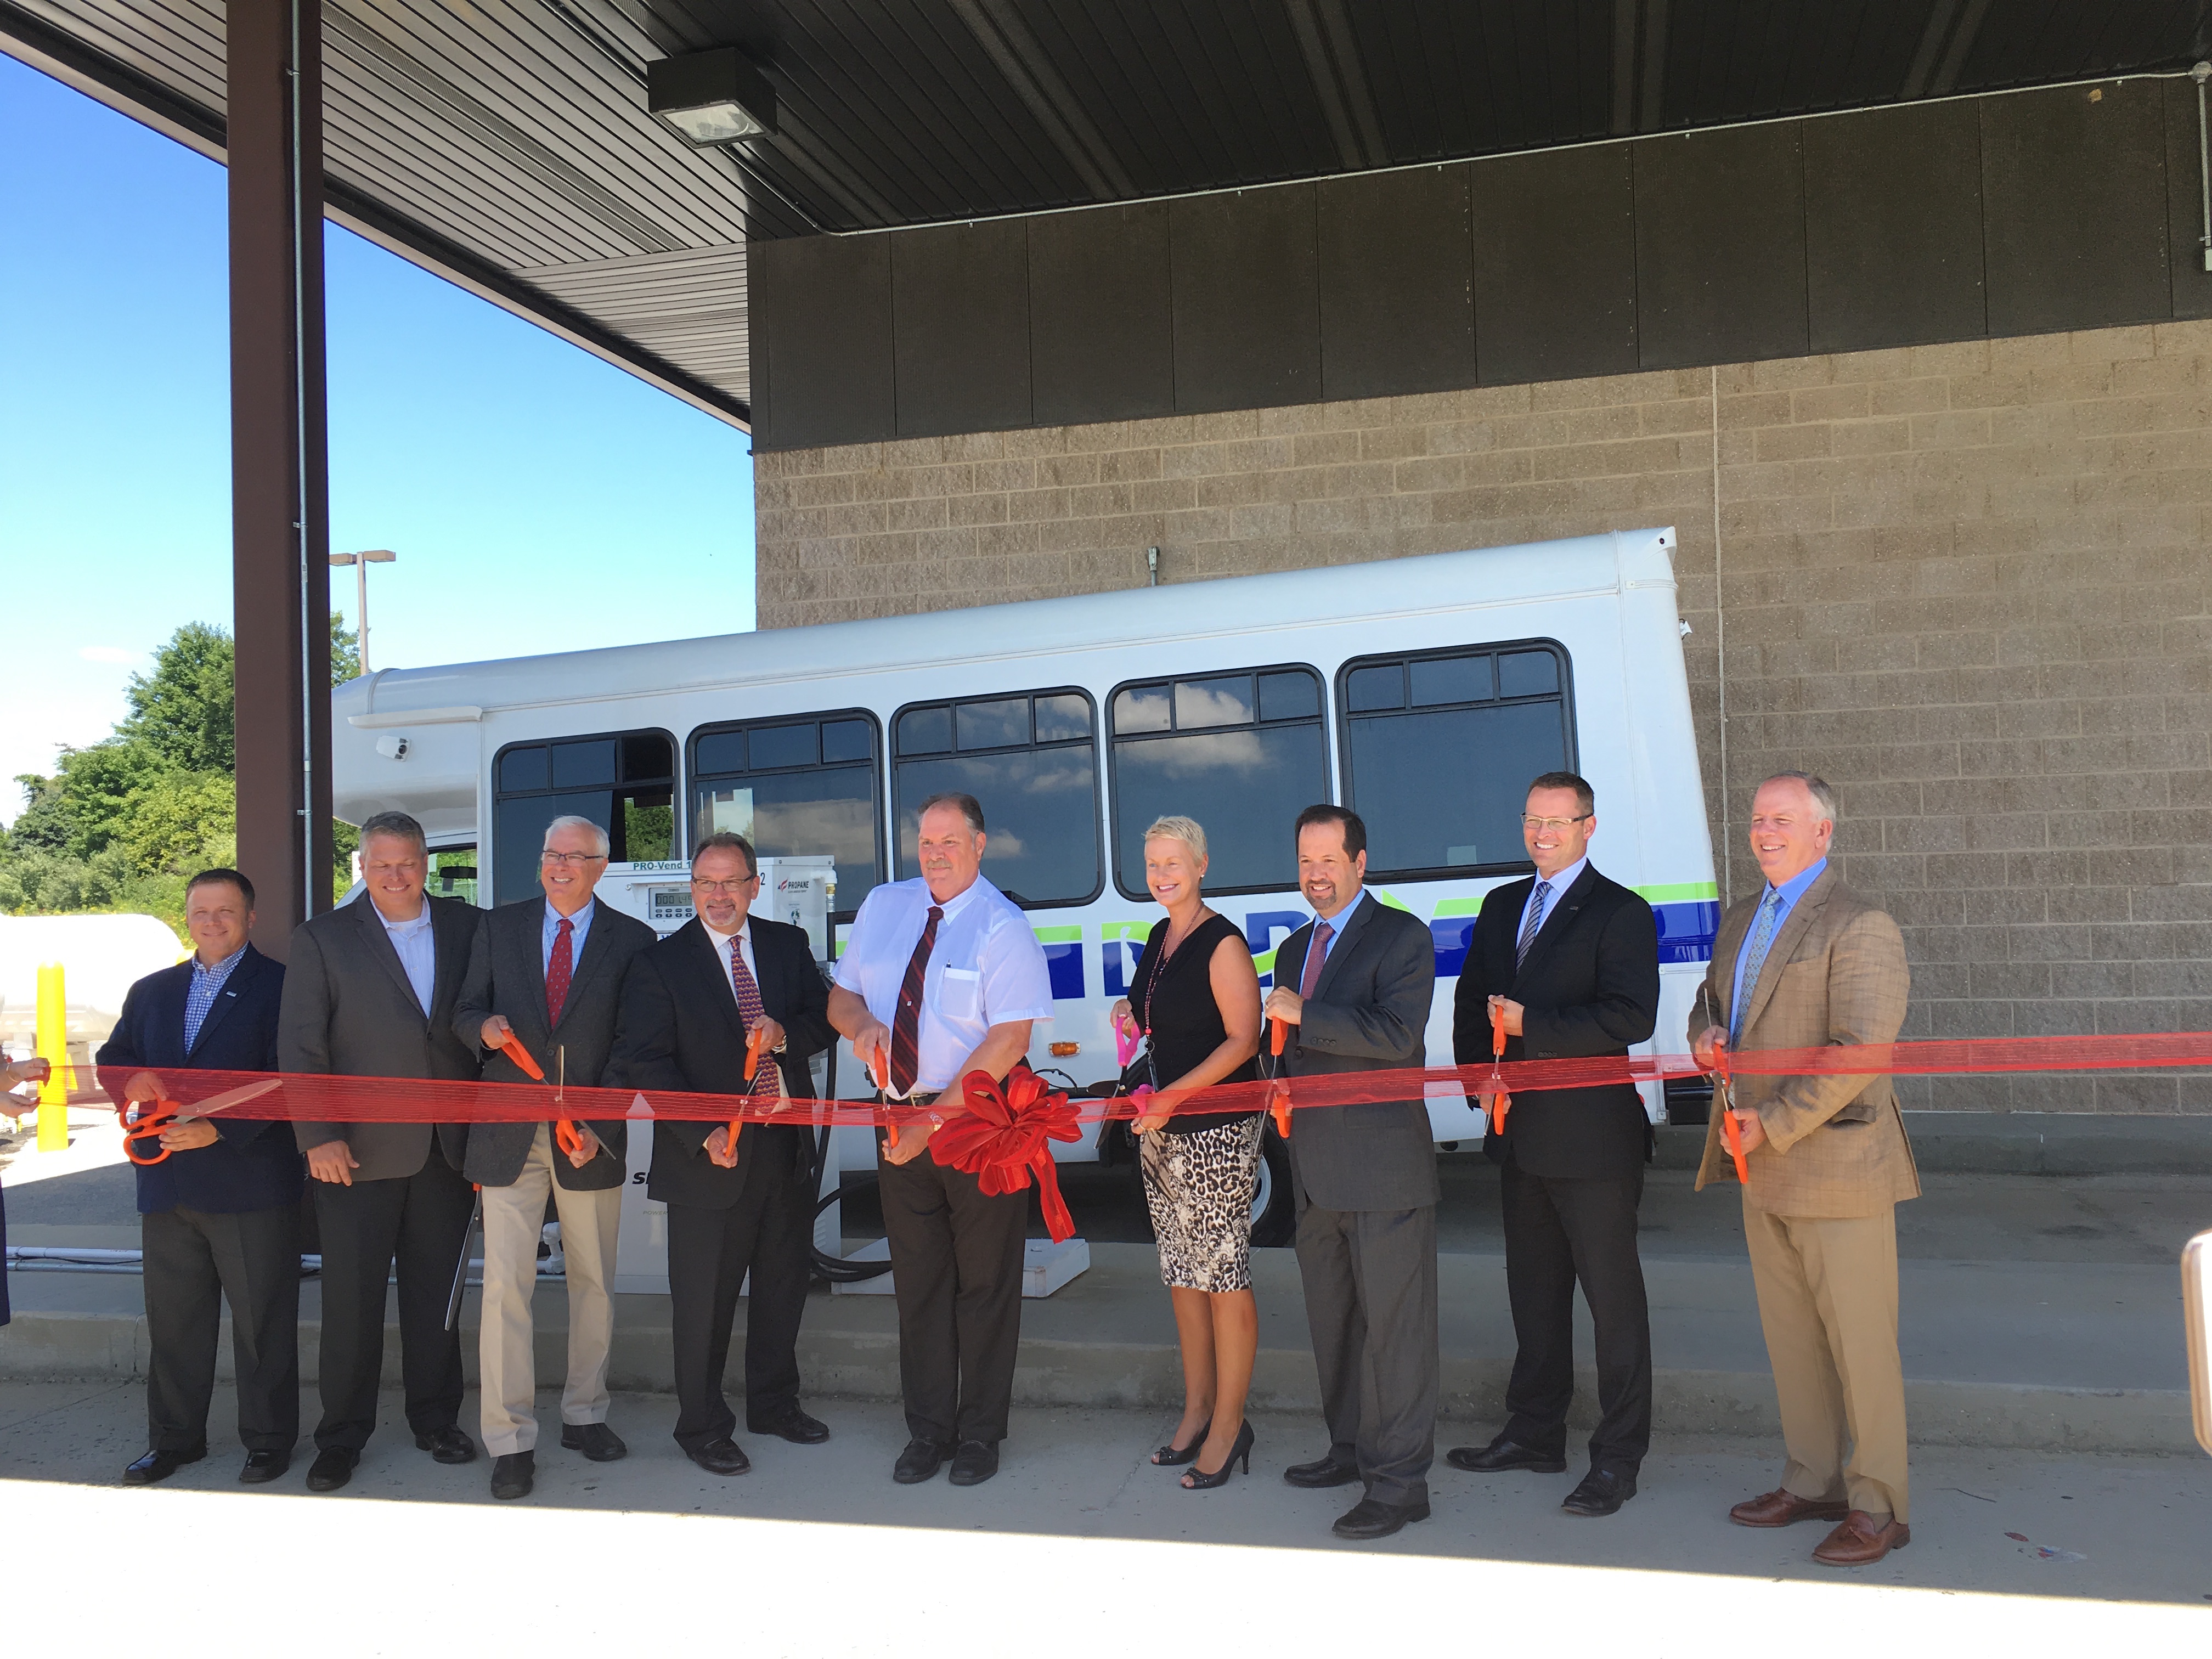 Delaware Department of Transportation (DelDOT) Secretary Jennifer Cohan, along with other officials, cut the ribbon to celebrate the Delaware Transit Corporation’s (DTC) new propane fuel station in Ne